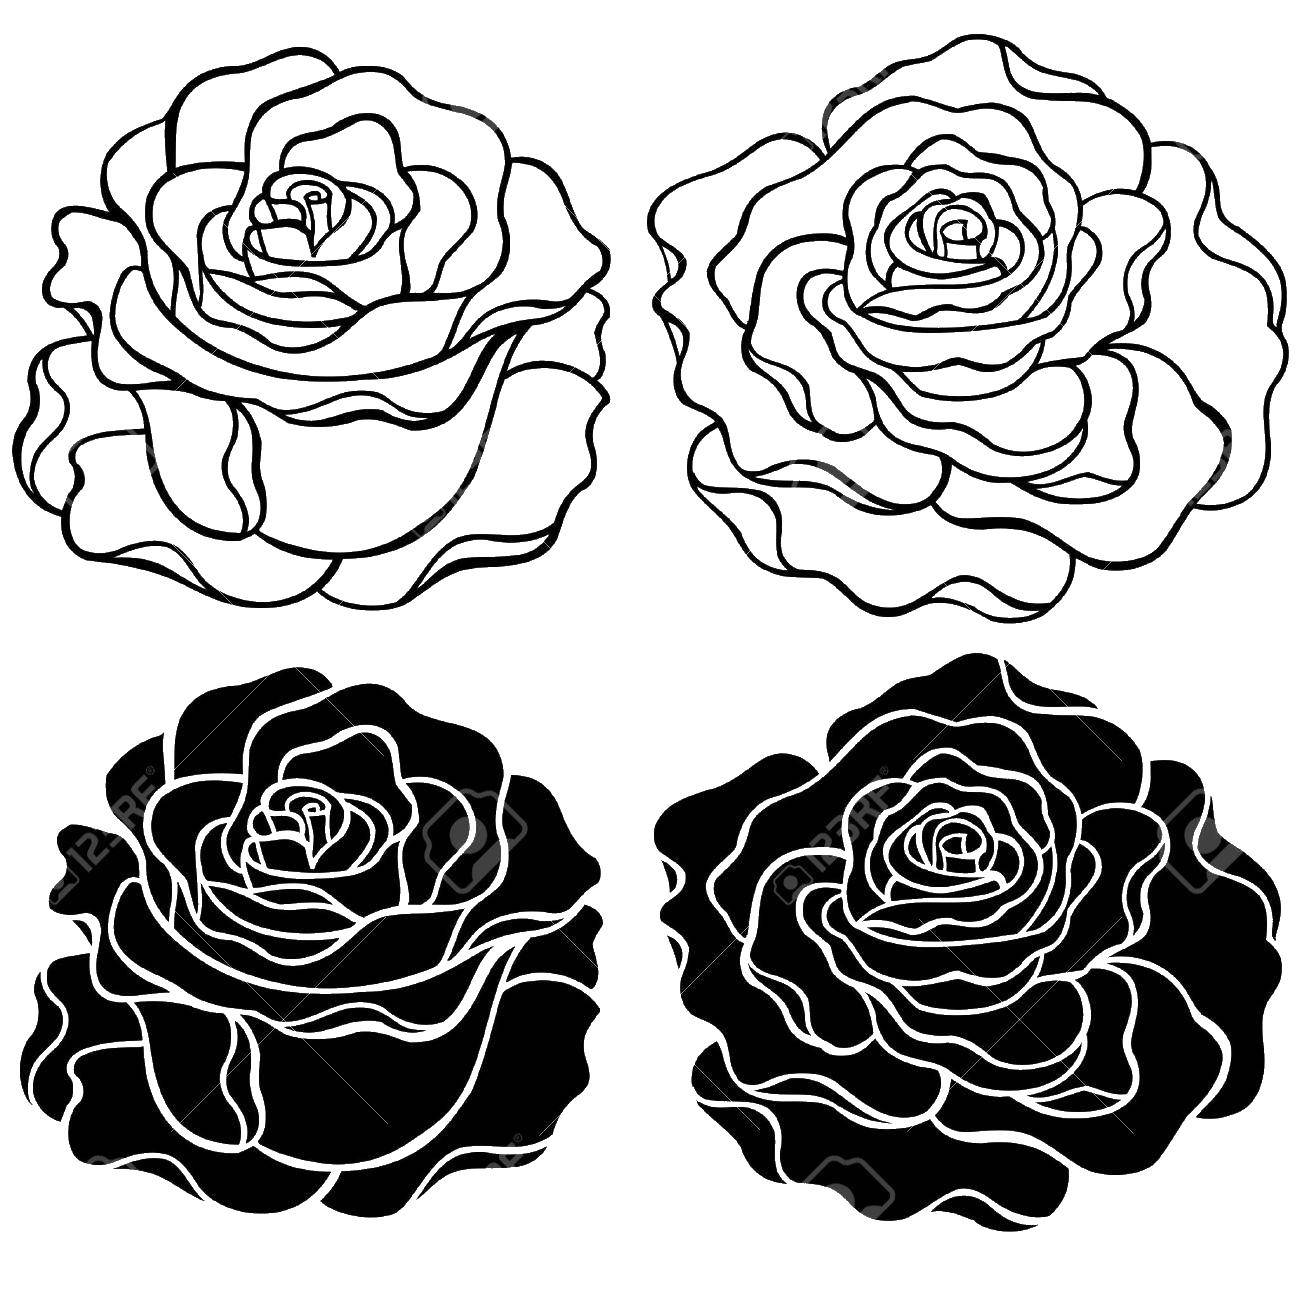 Coloring Roses. Category The contours of a rose. Tags:  Rose.